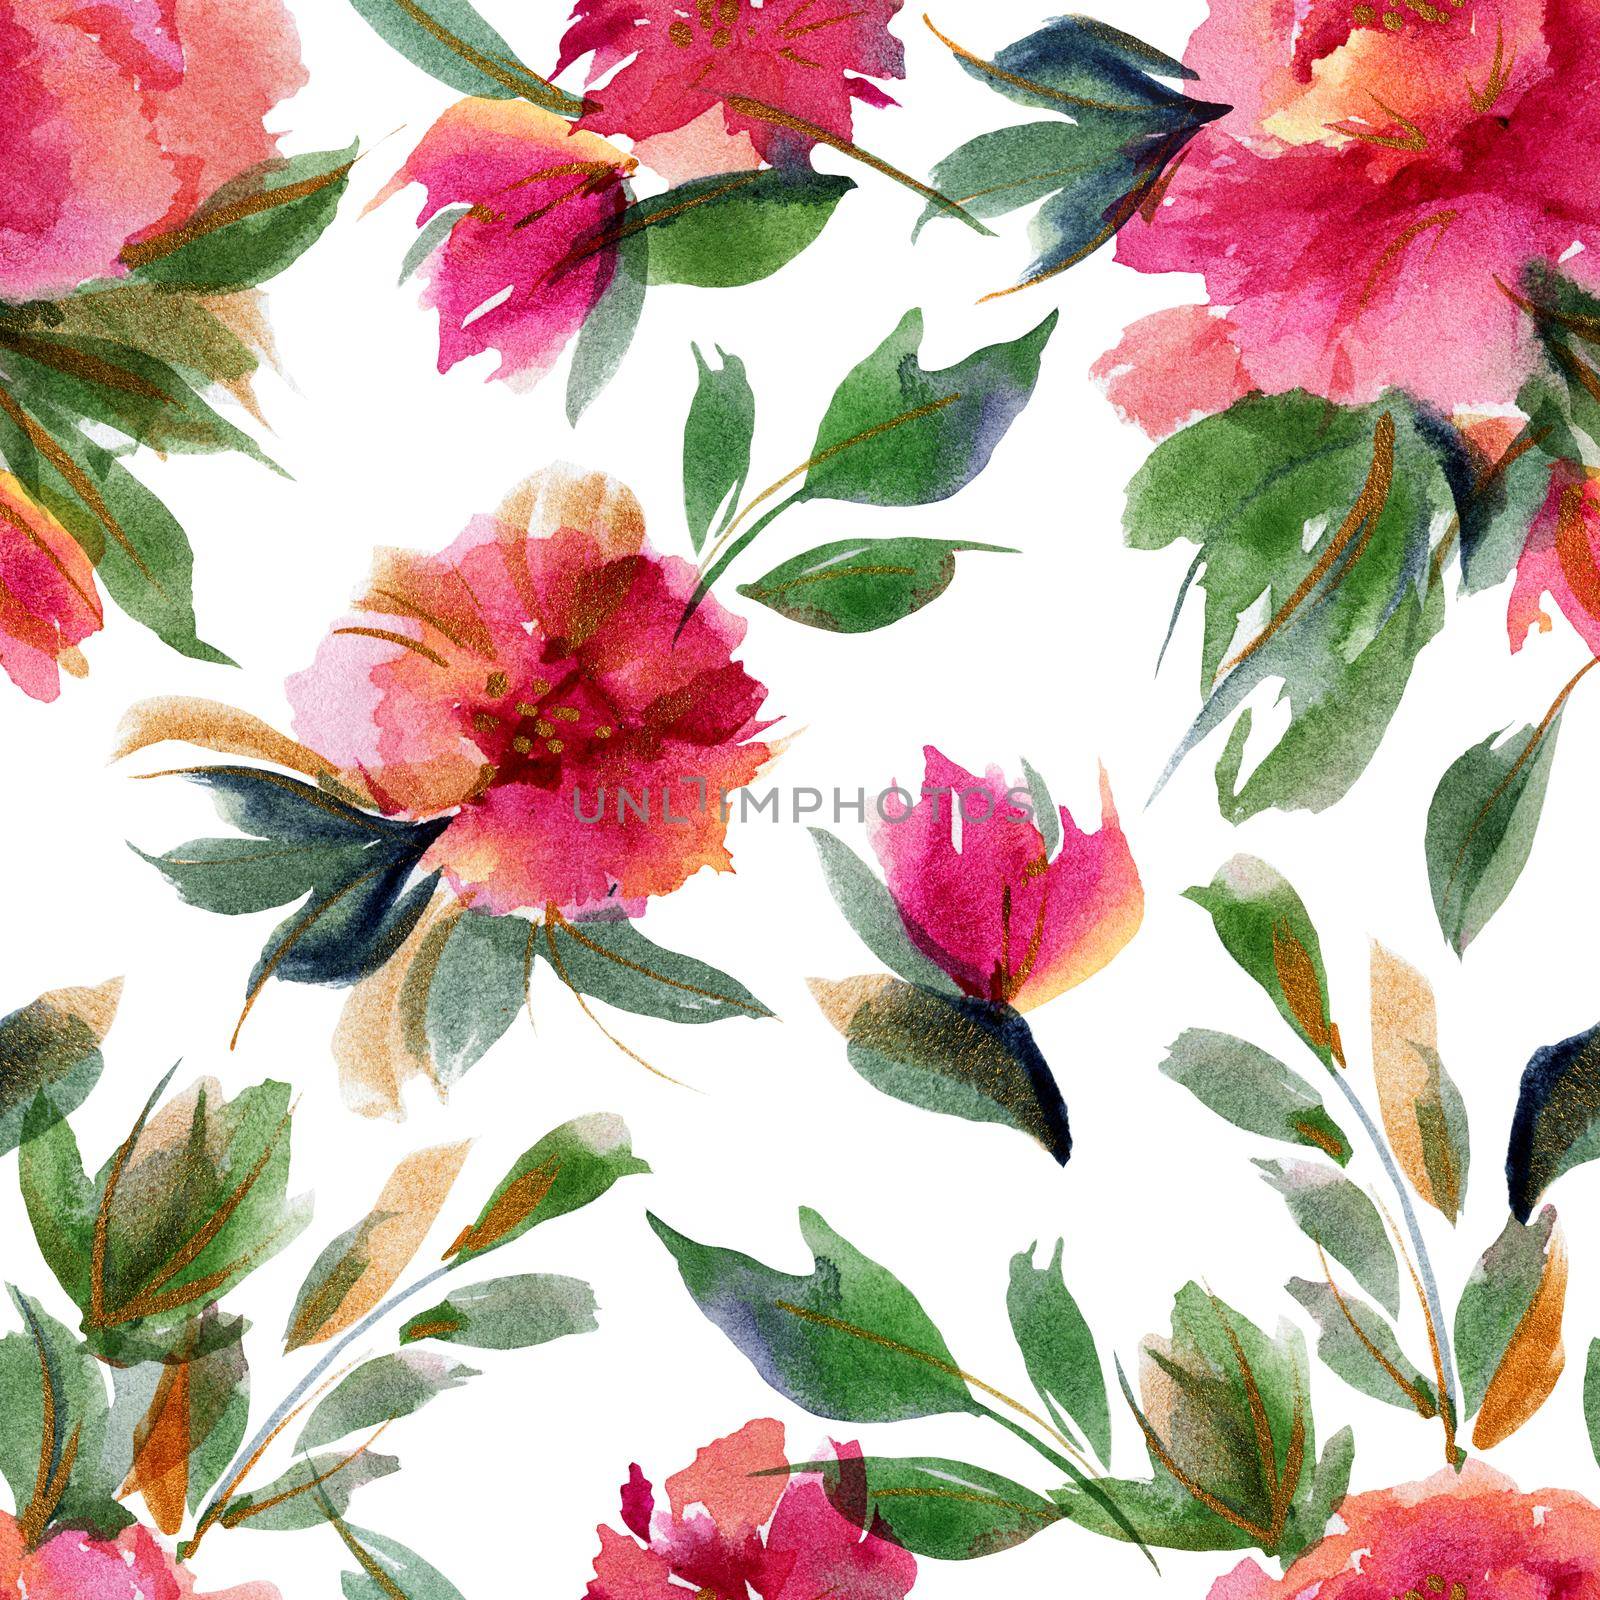 Pink Peony botanical watercolor seamless pattern by Xeniasnowstorm